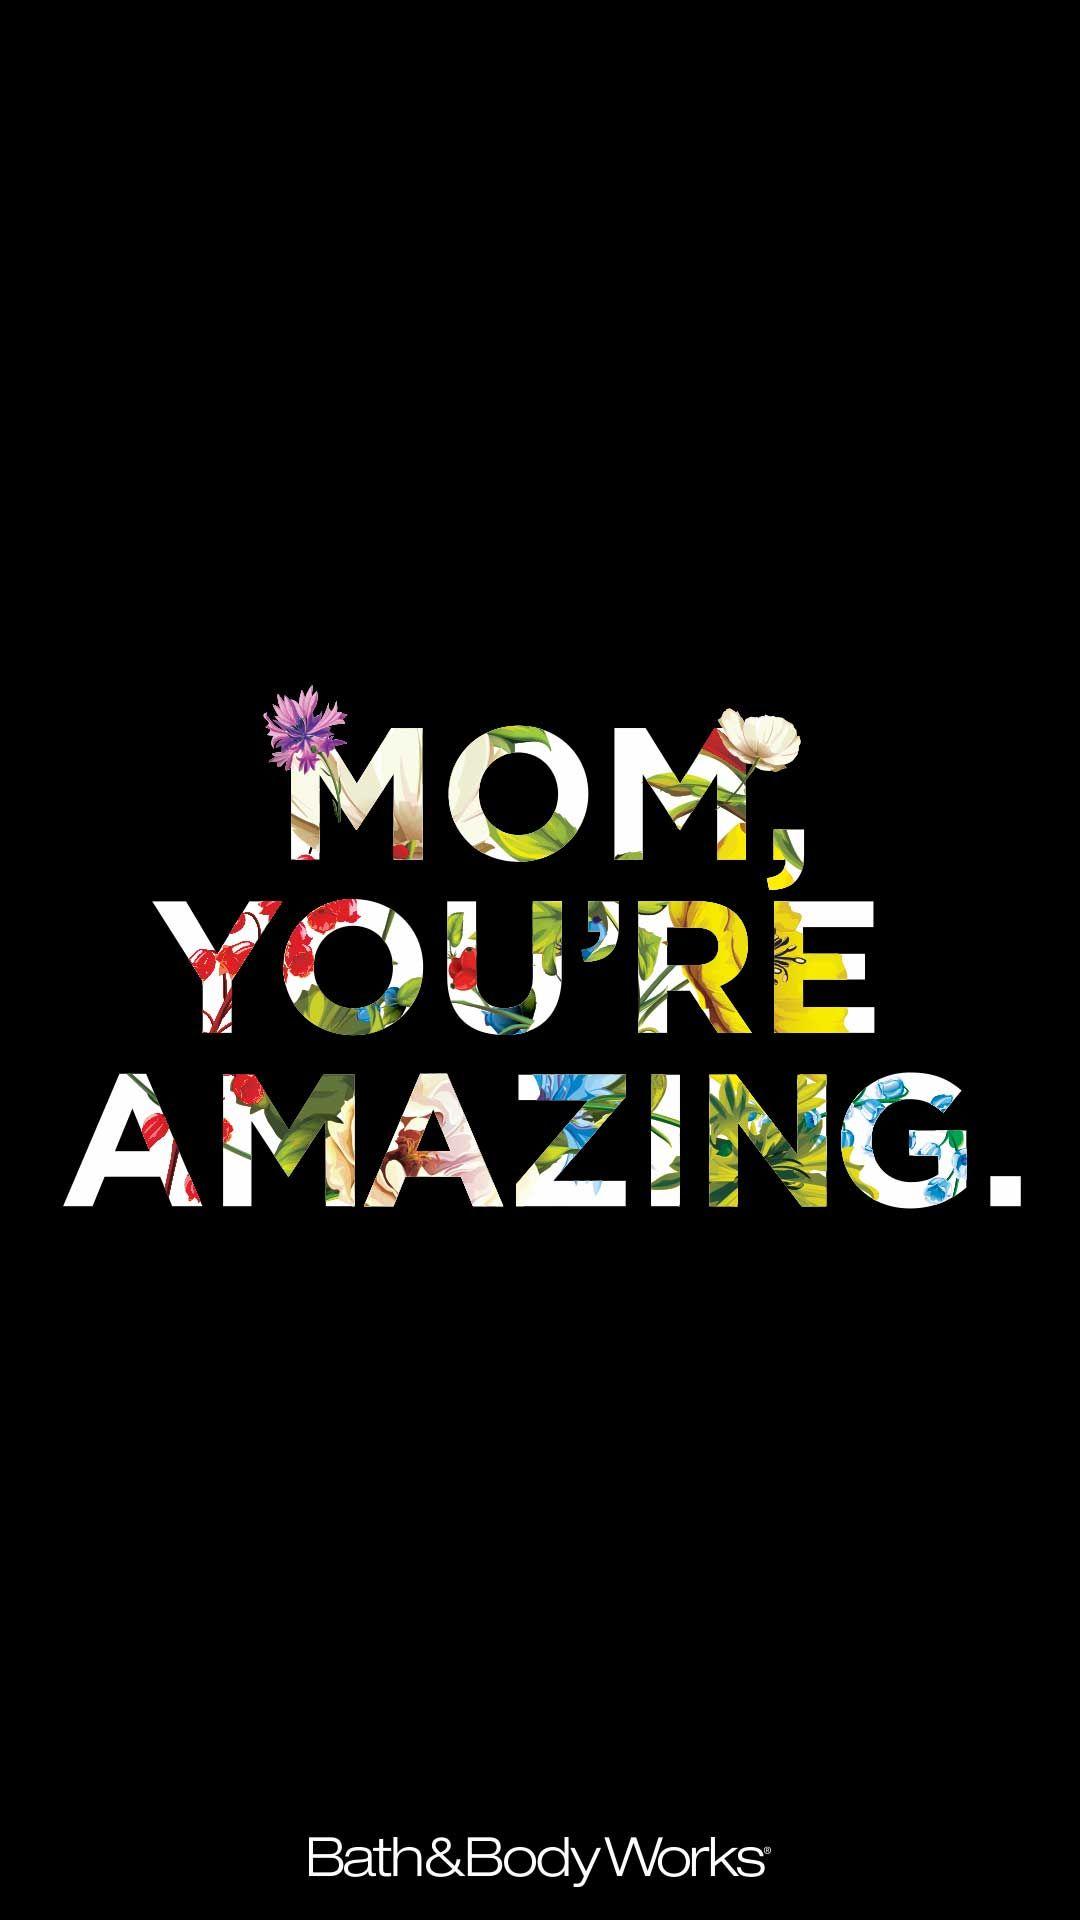 Mom, You're Amazing Wallpaper. Words wallpaper, You're awesome, Mums wallpaper